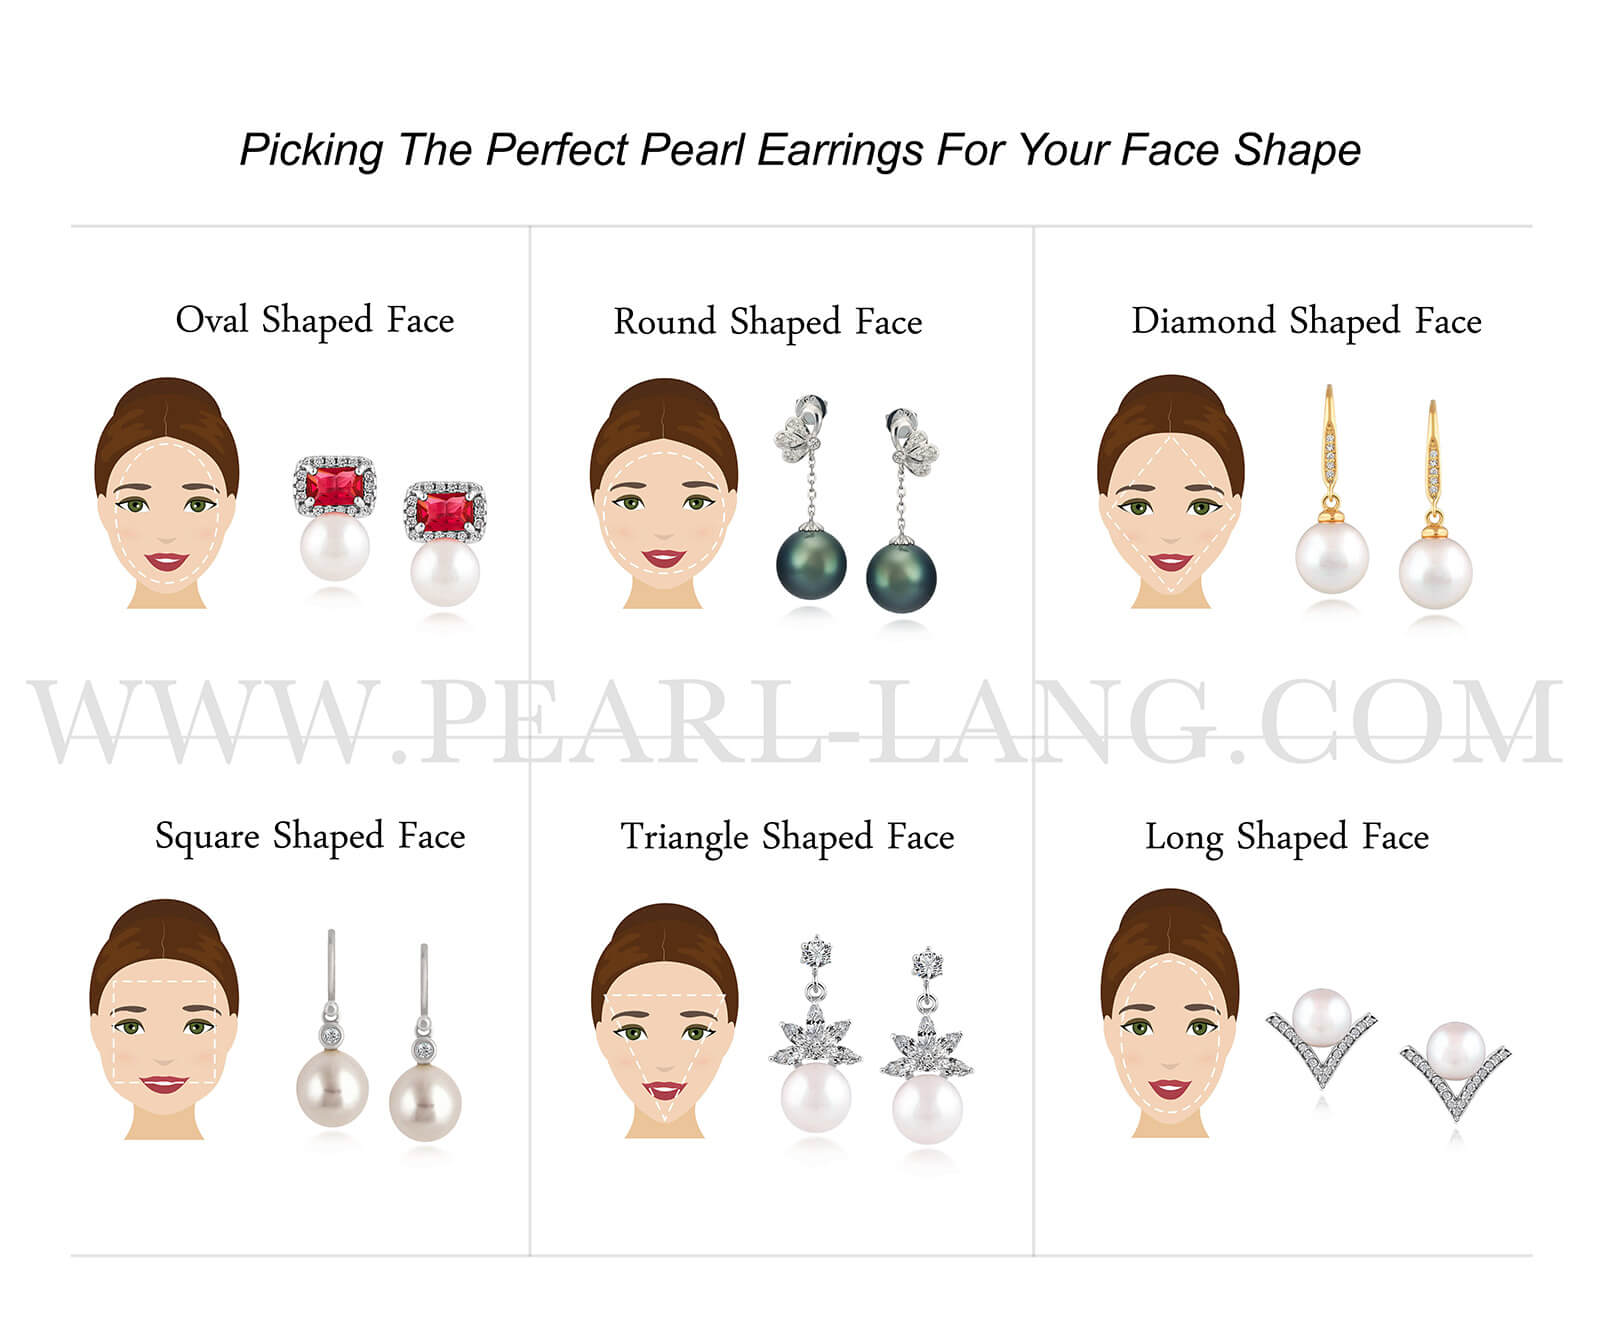 Picking the Perfect Pearl Earrings For Your Face Shape